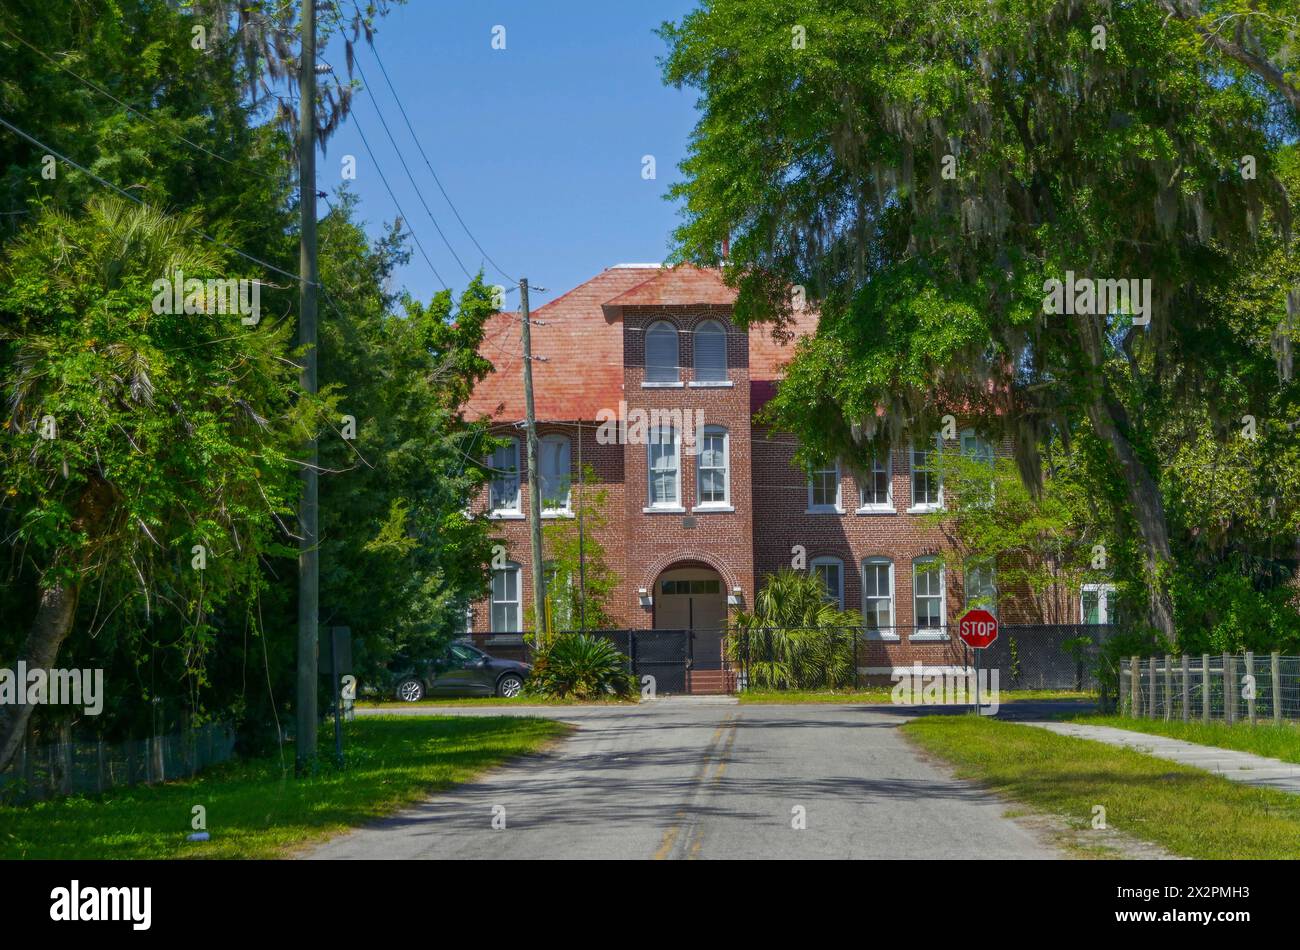 Original building of an elementary school in a small North Florida Town. Stock Photo